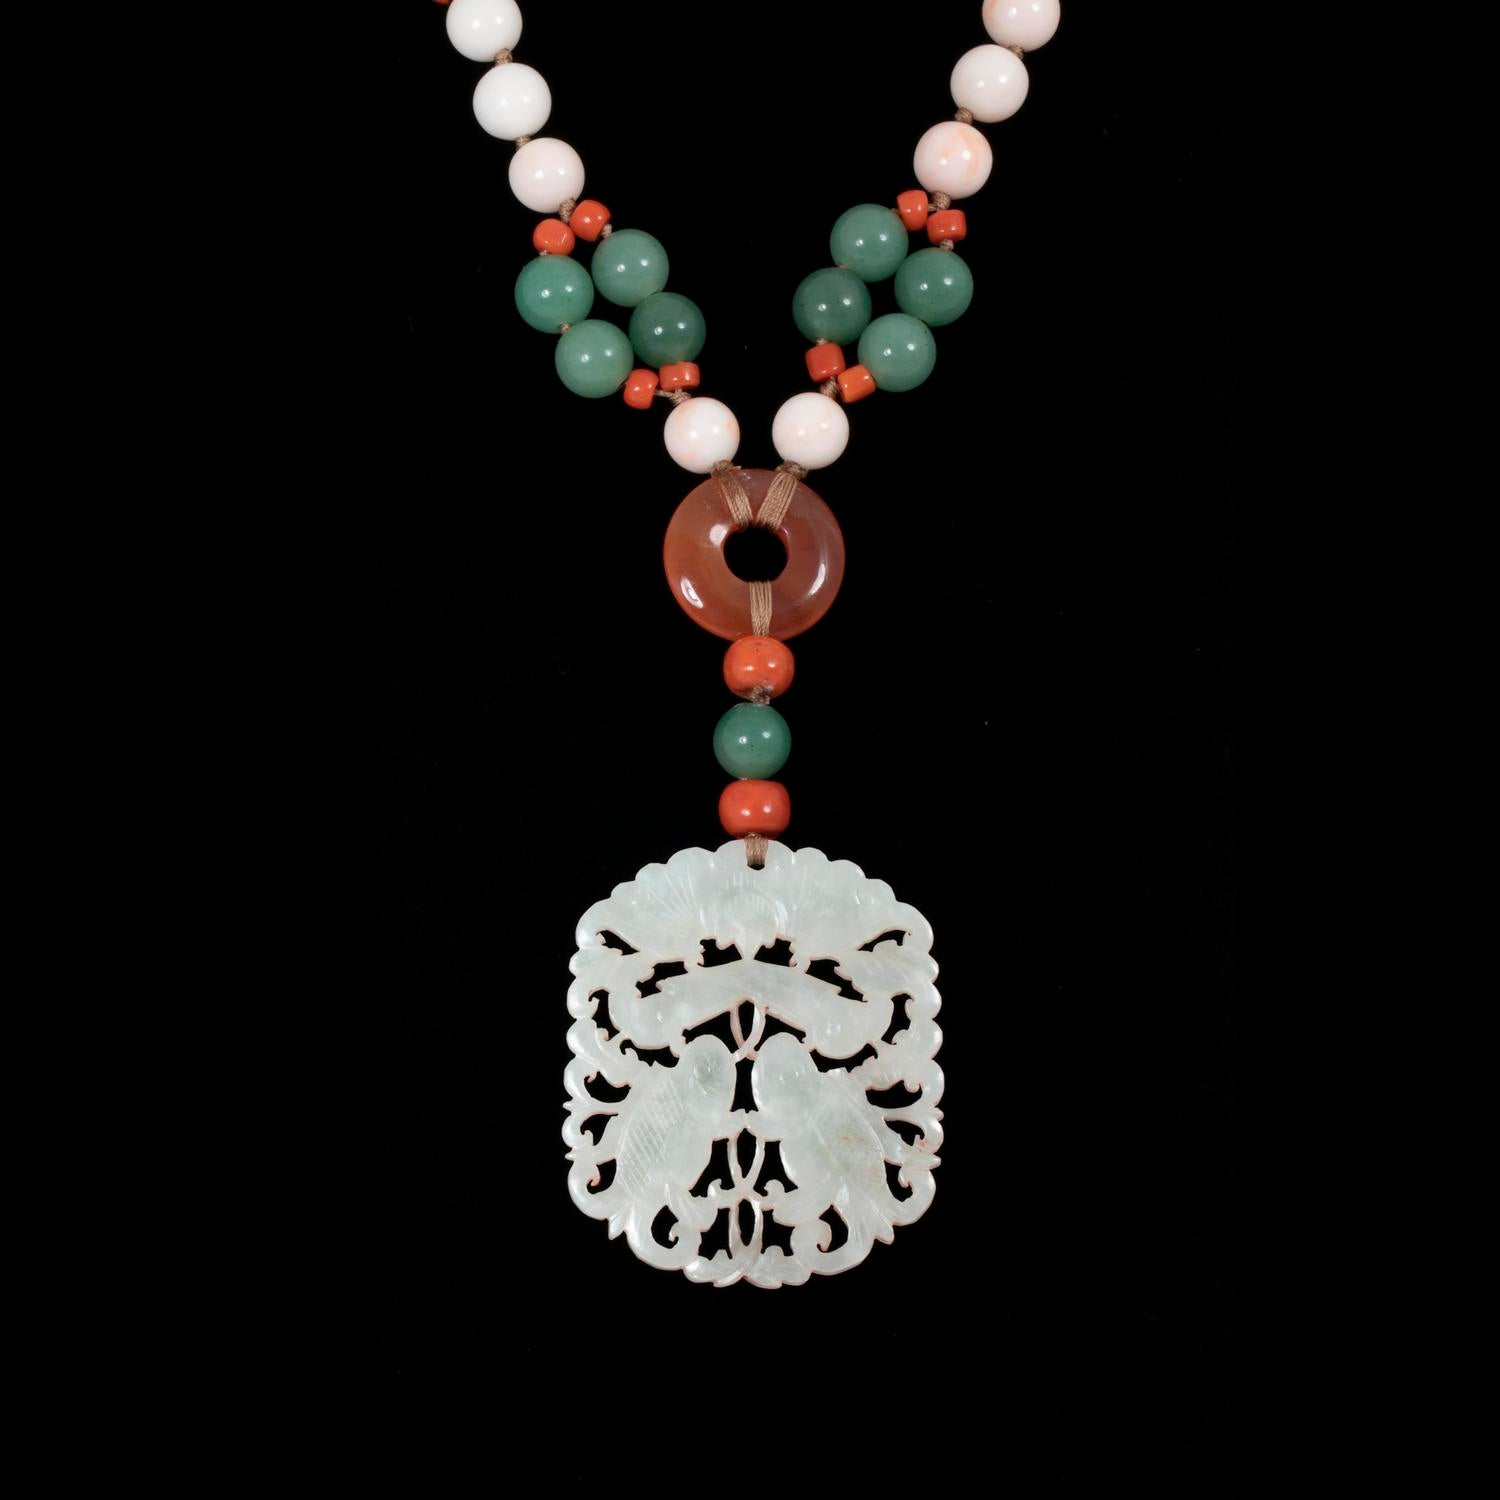 Exquisite Asian-inspired necklace adorned with a intricate white jade pendant.